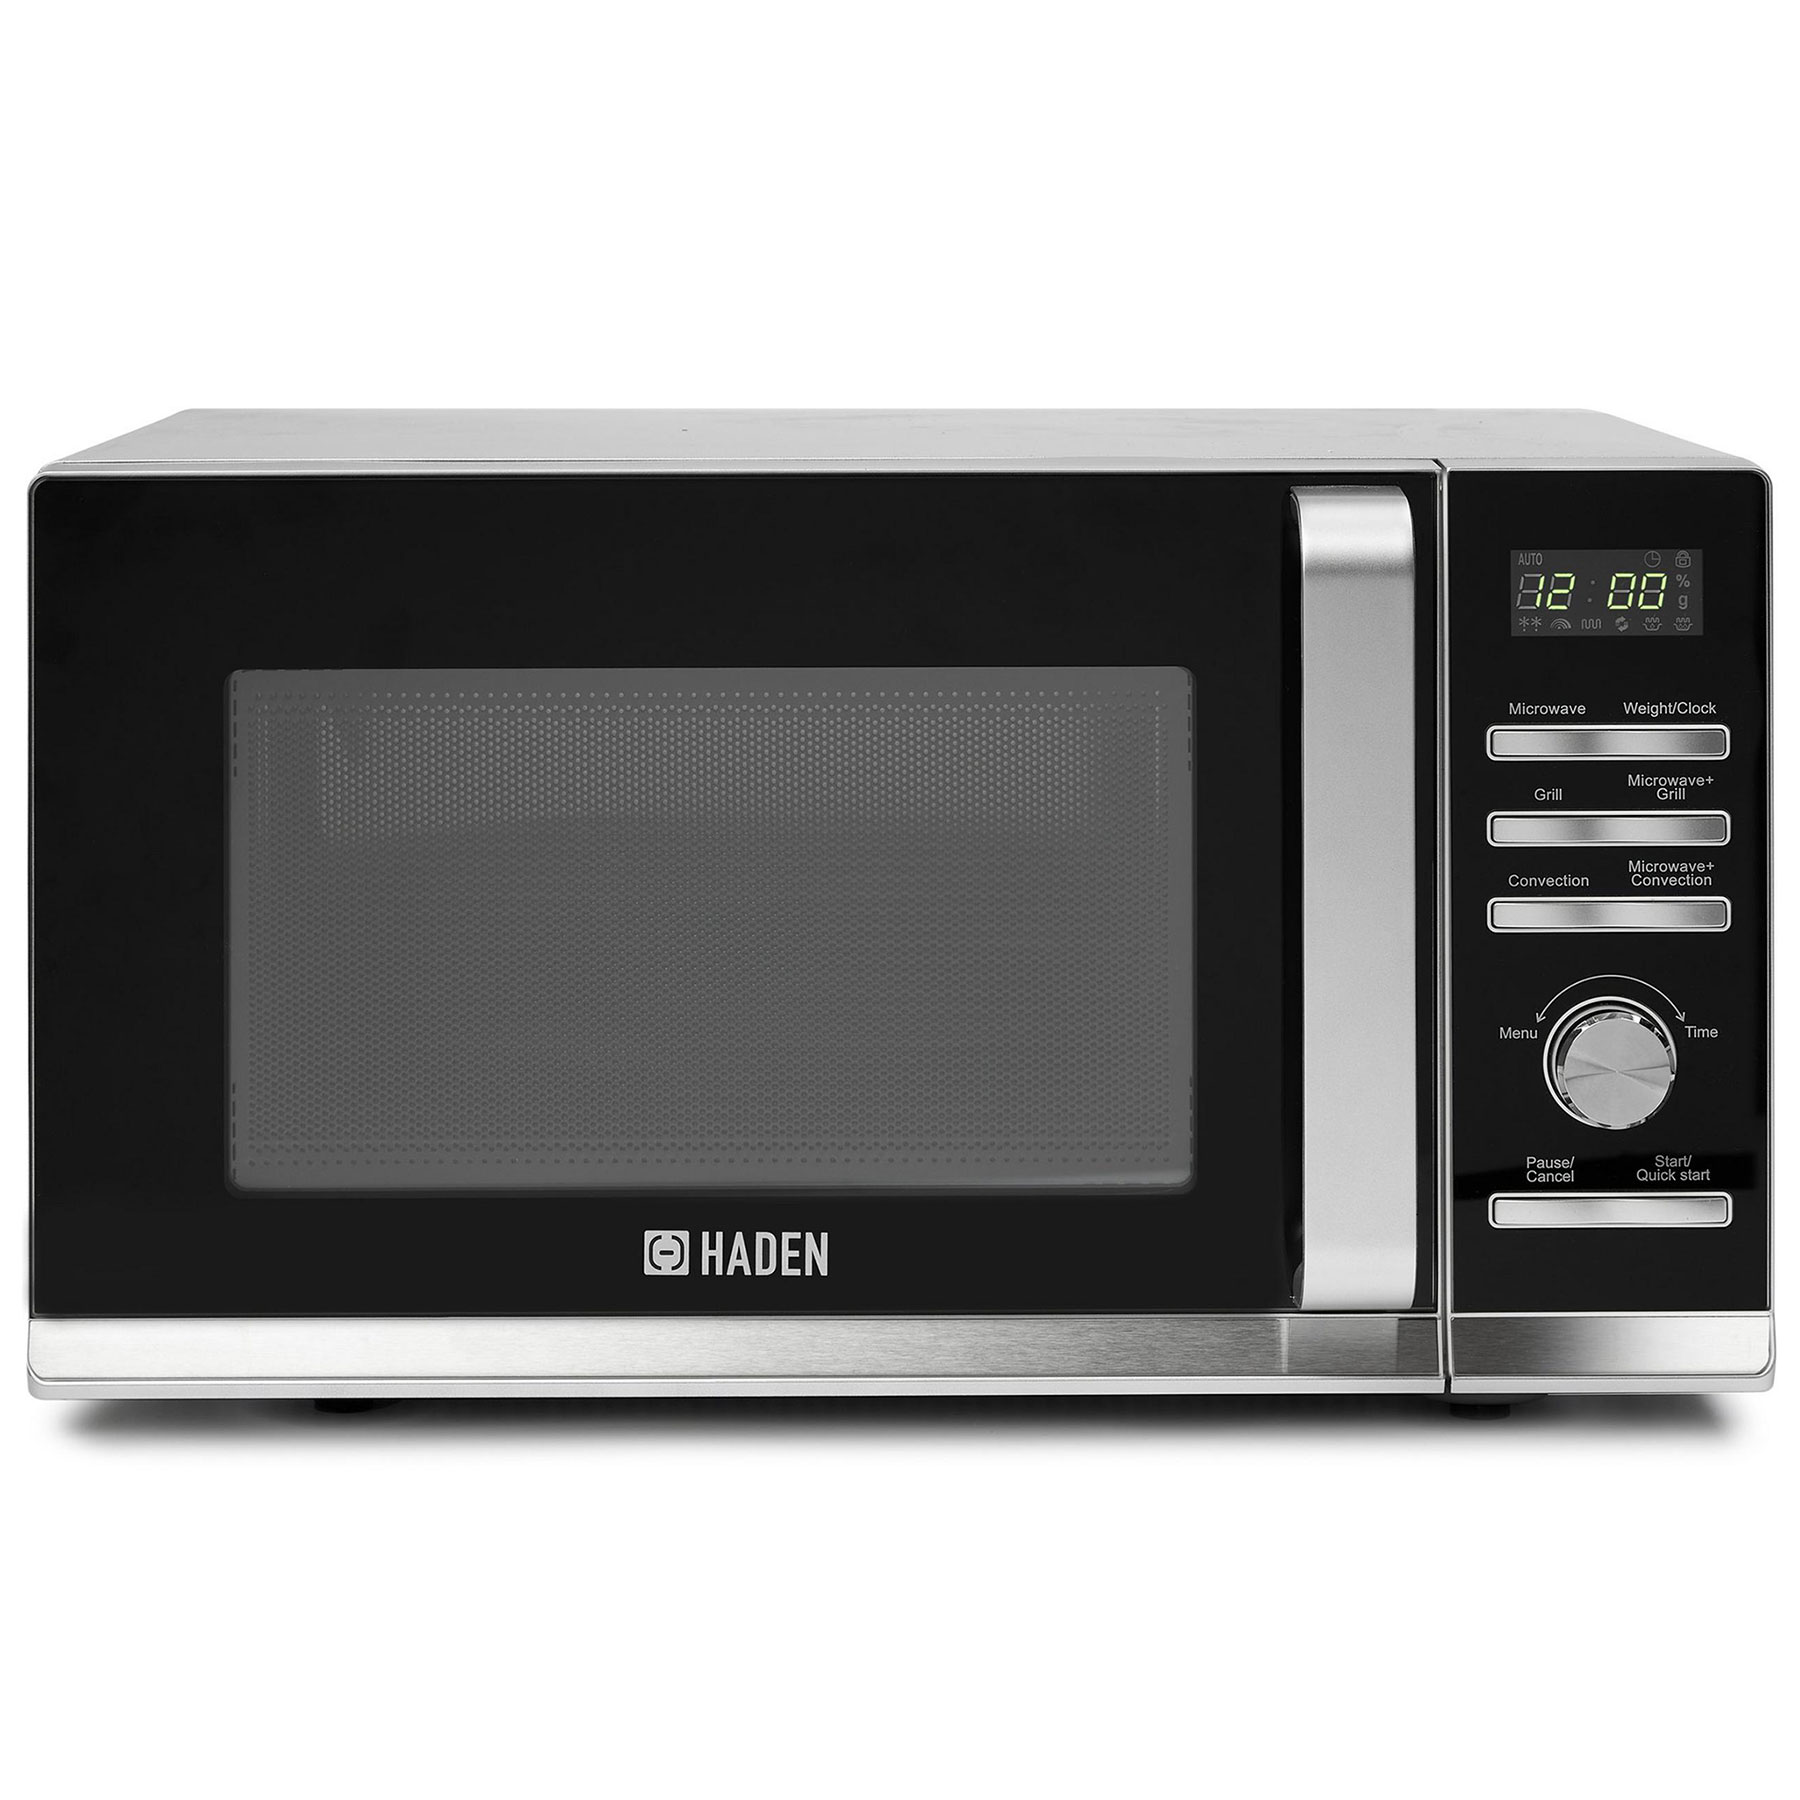 Haden 199102 Combination Microwave Oven with Grill Silver 25L 900W